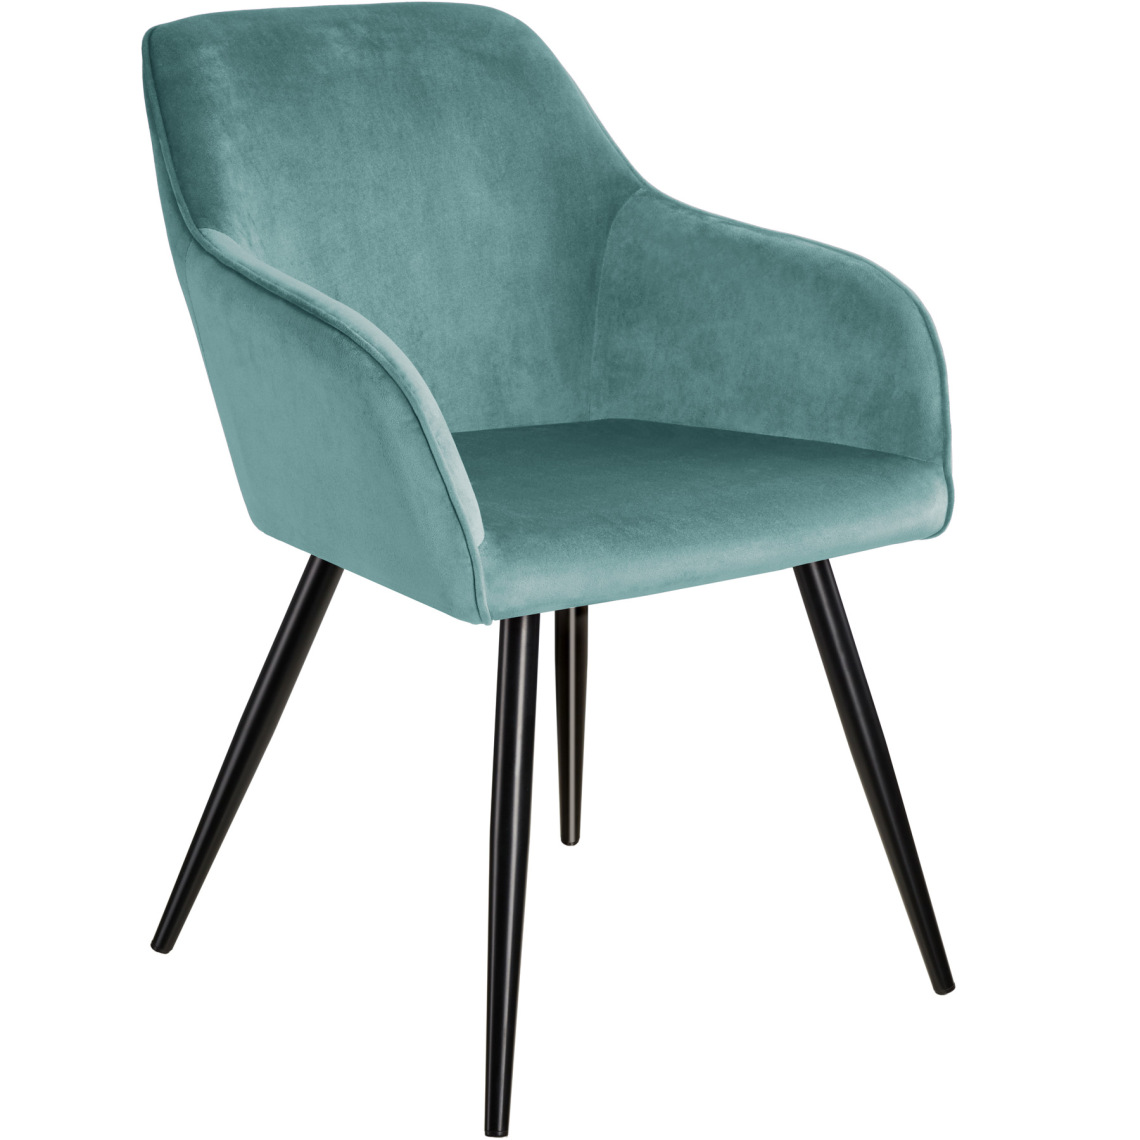 Tectake - Chaise MARILYN Effet Velours Style Scandinave - turquoise/noir - Chaises